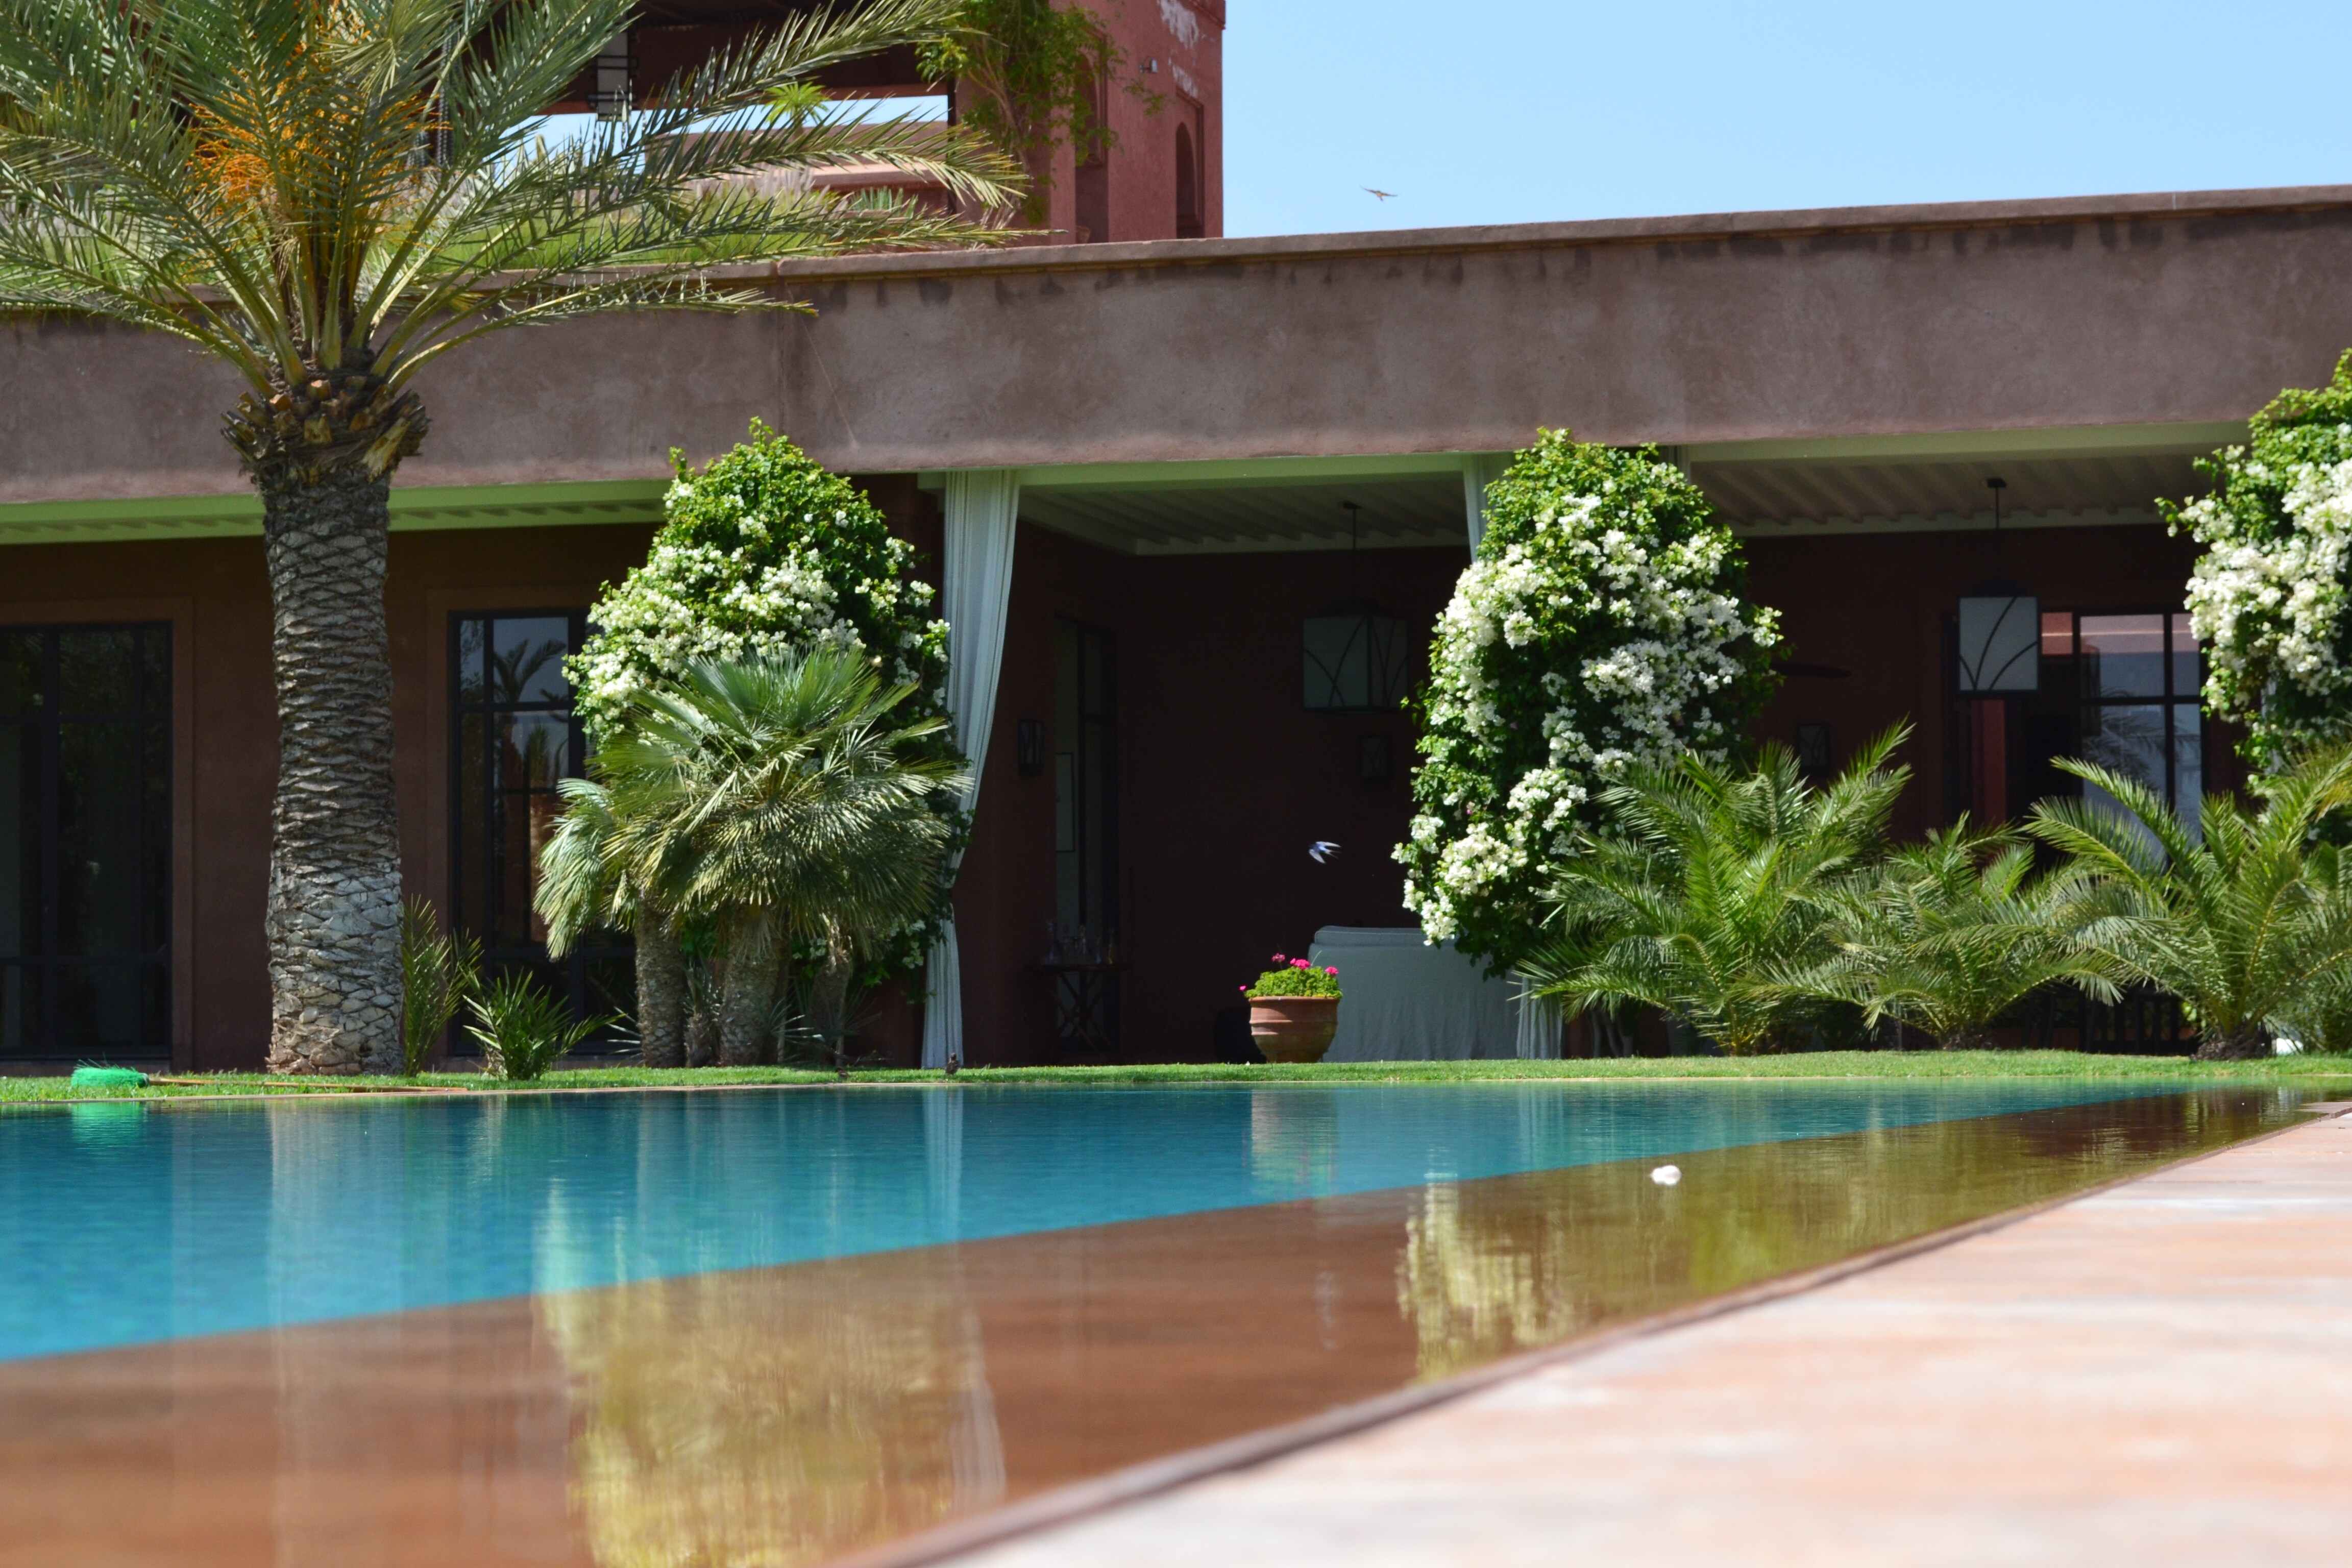 Property Image 2 - Villa with pool and hammam route de l Ourika - by feelluxuryholidays